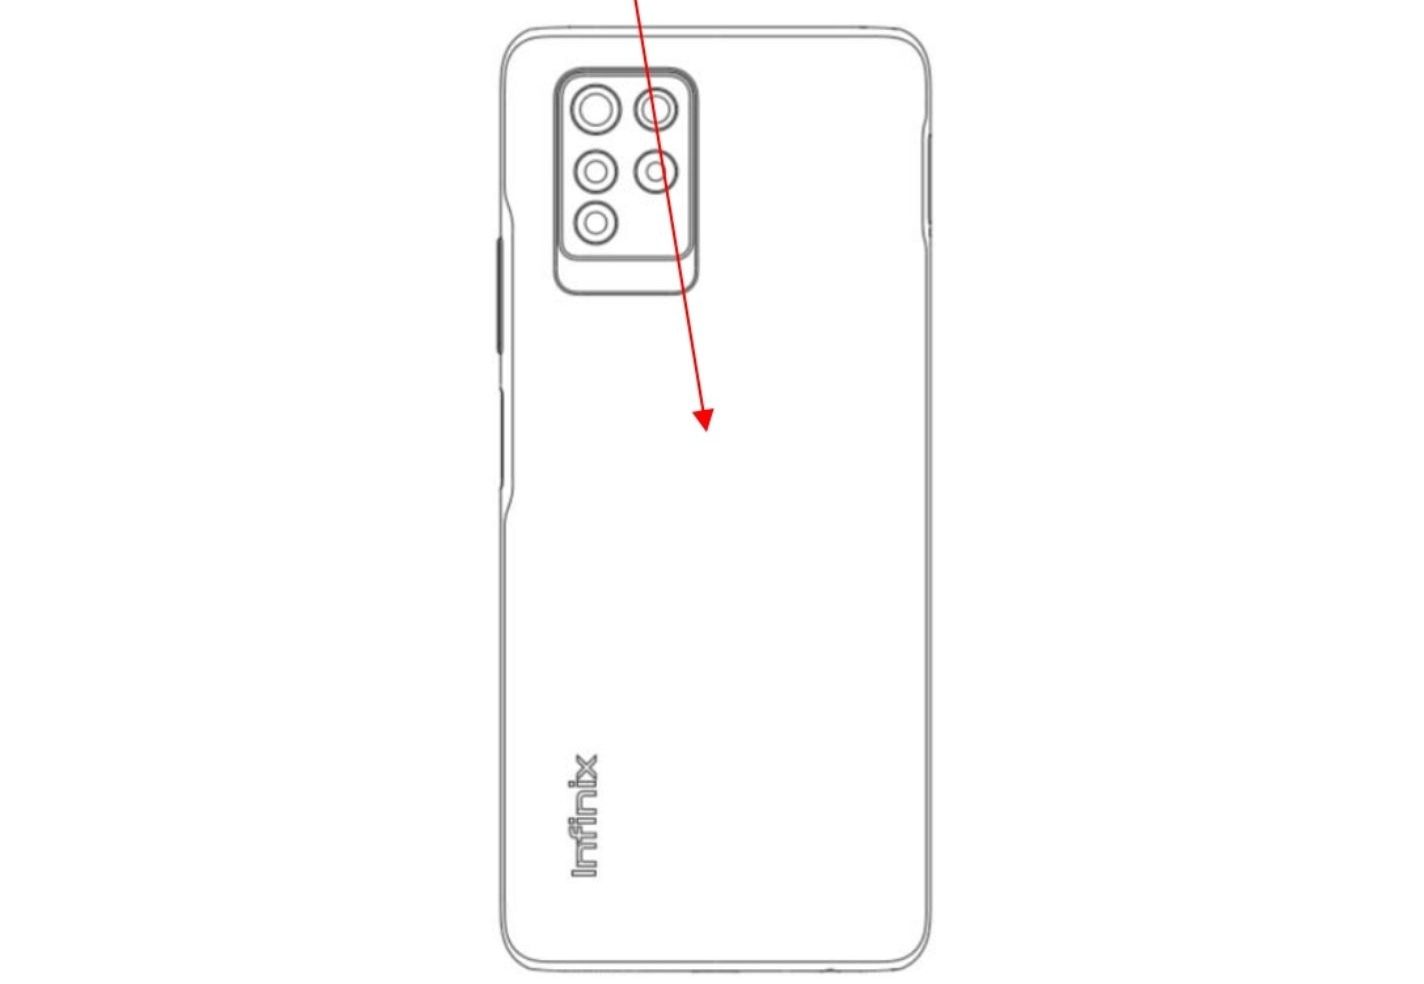 FCC Approval of the Infinix Note 10 Pro Suggests It May Arrive Soon